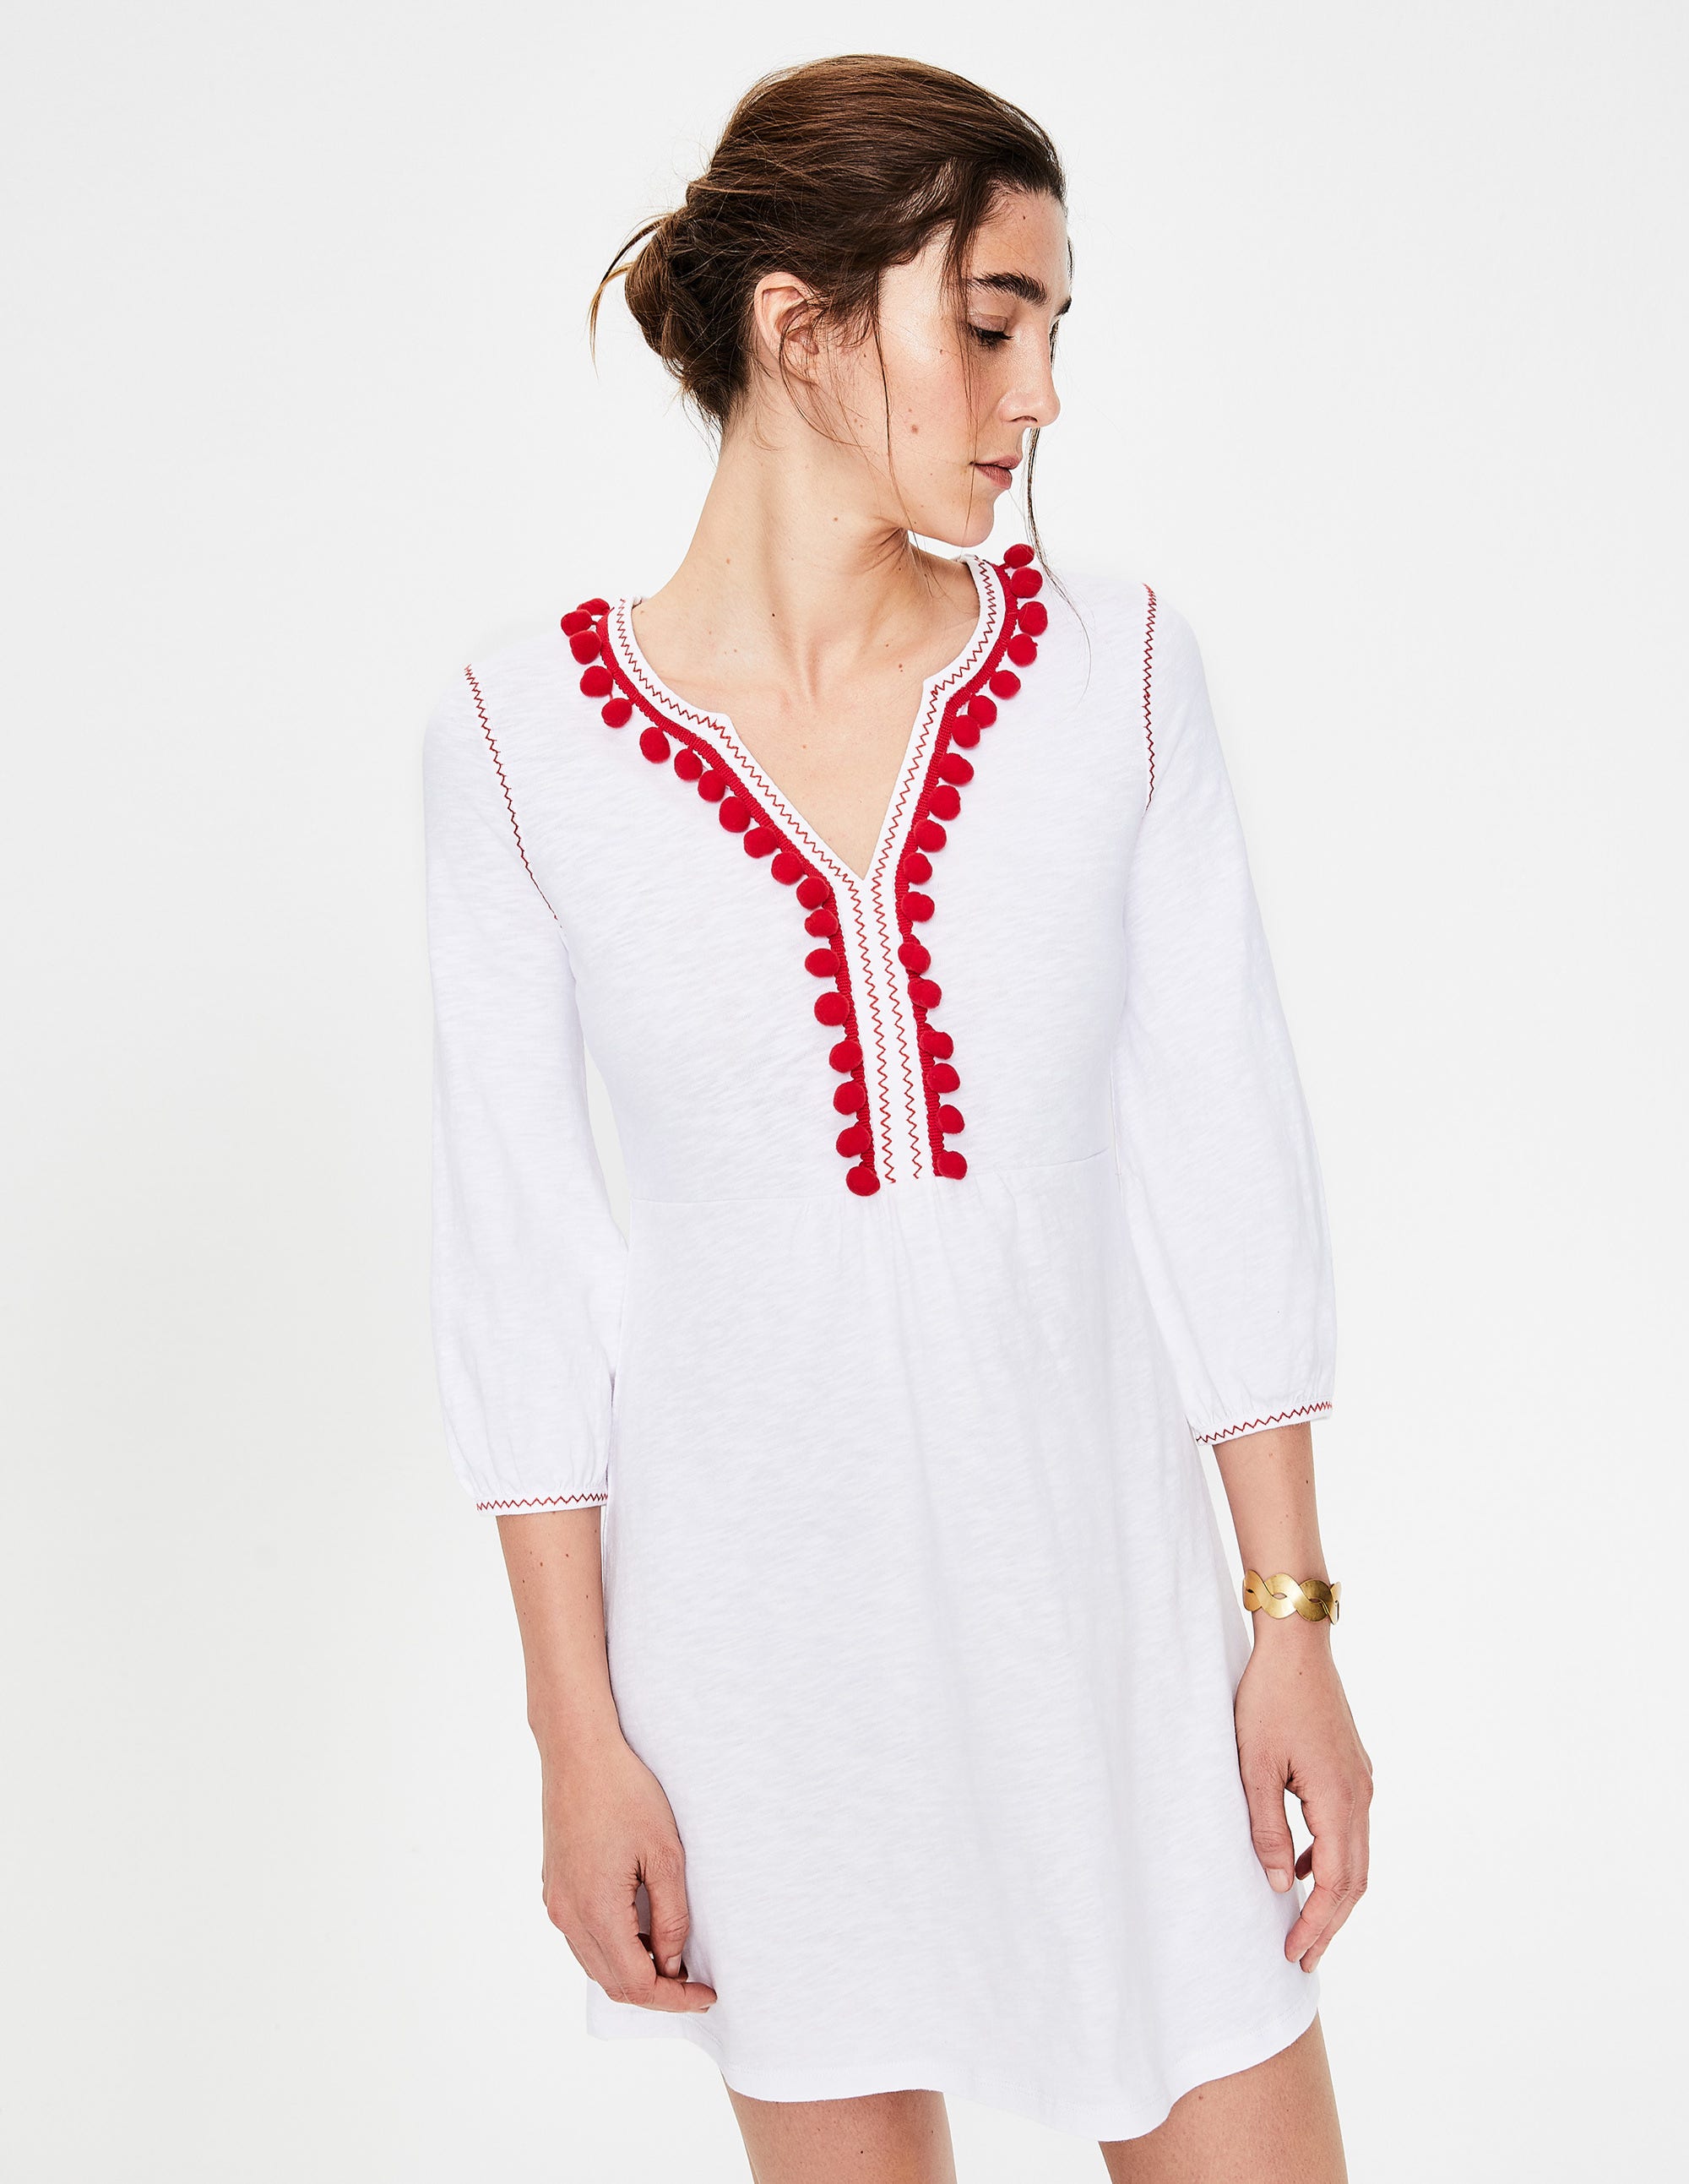 Carina Jersey Tunic - Red Pop//Candy 